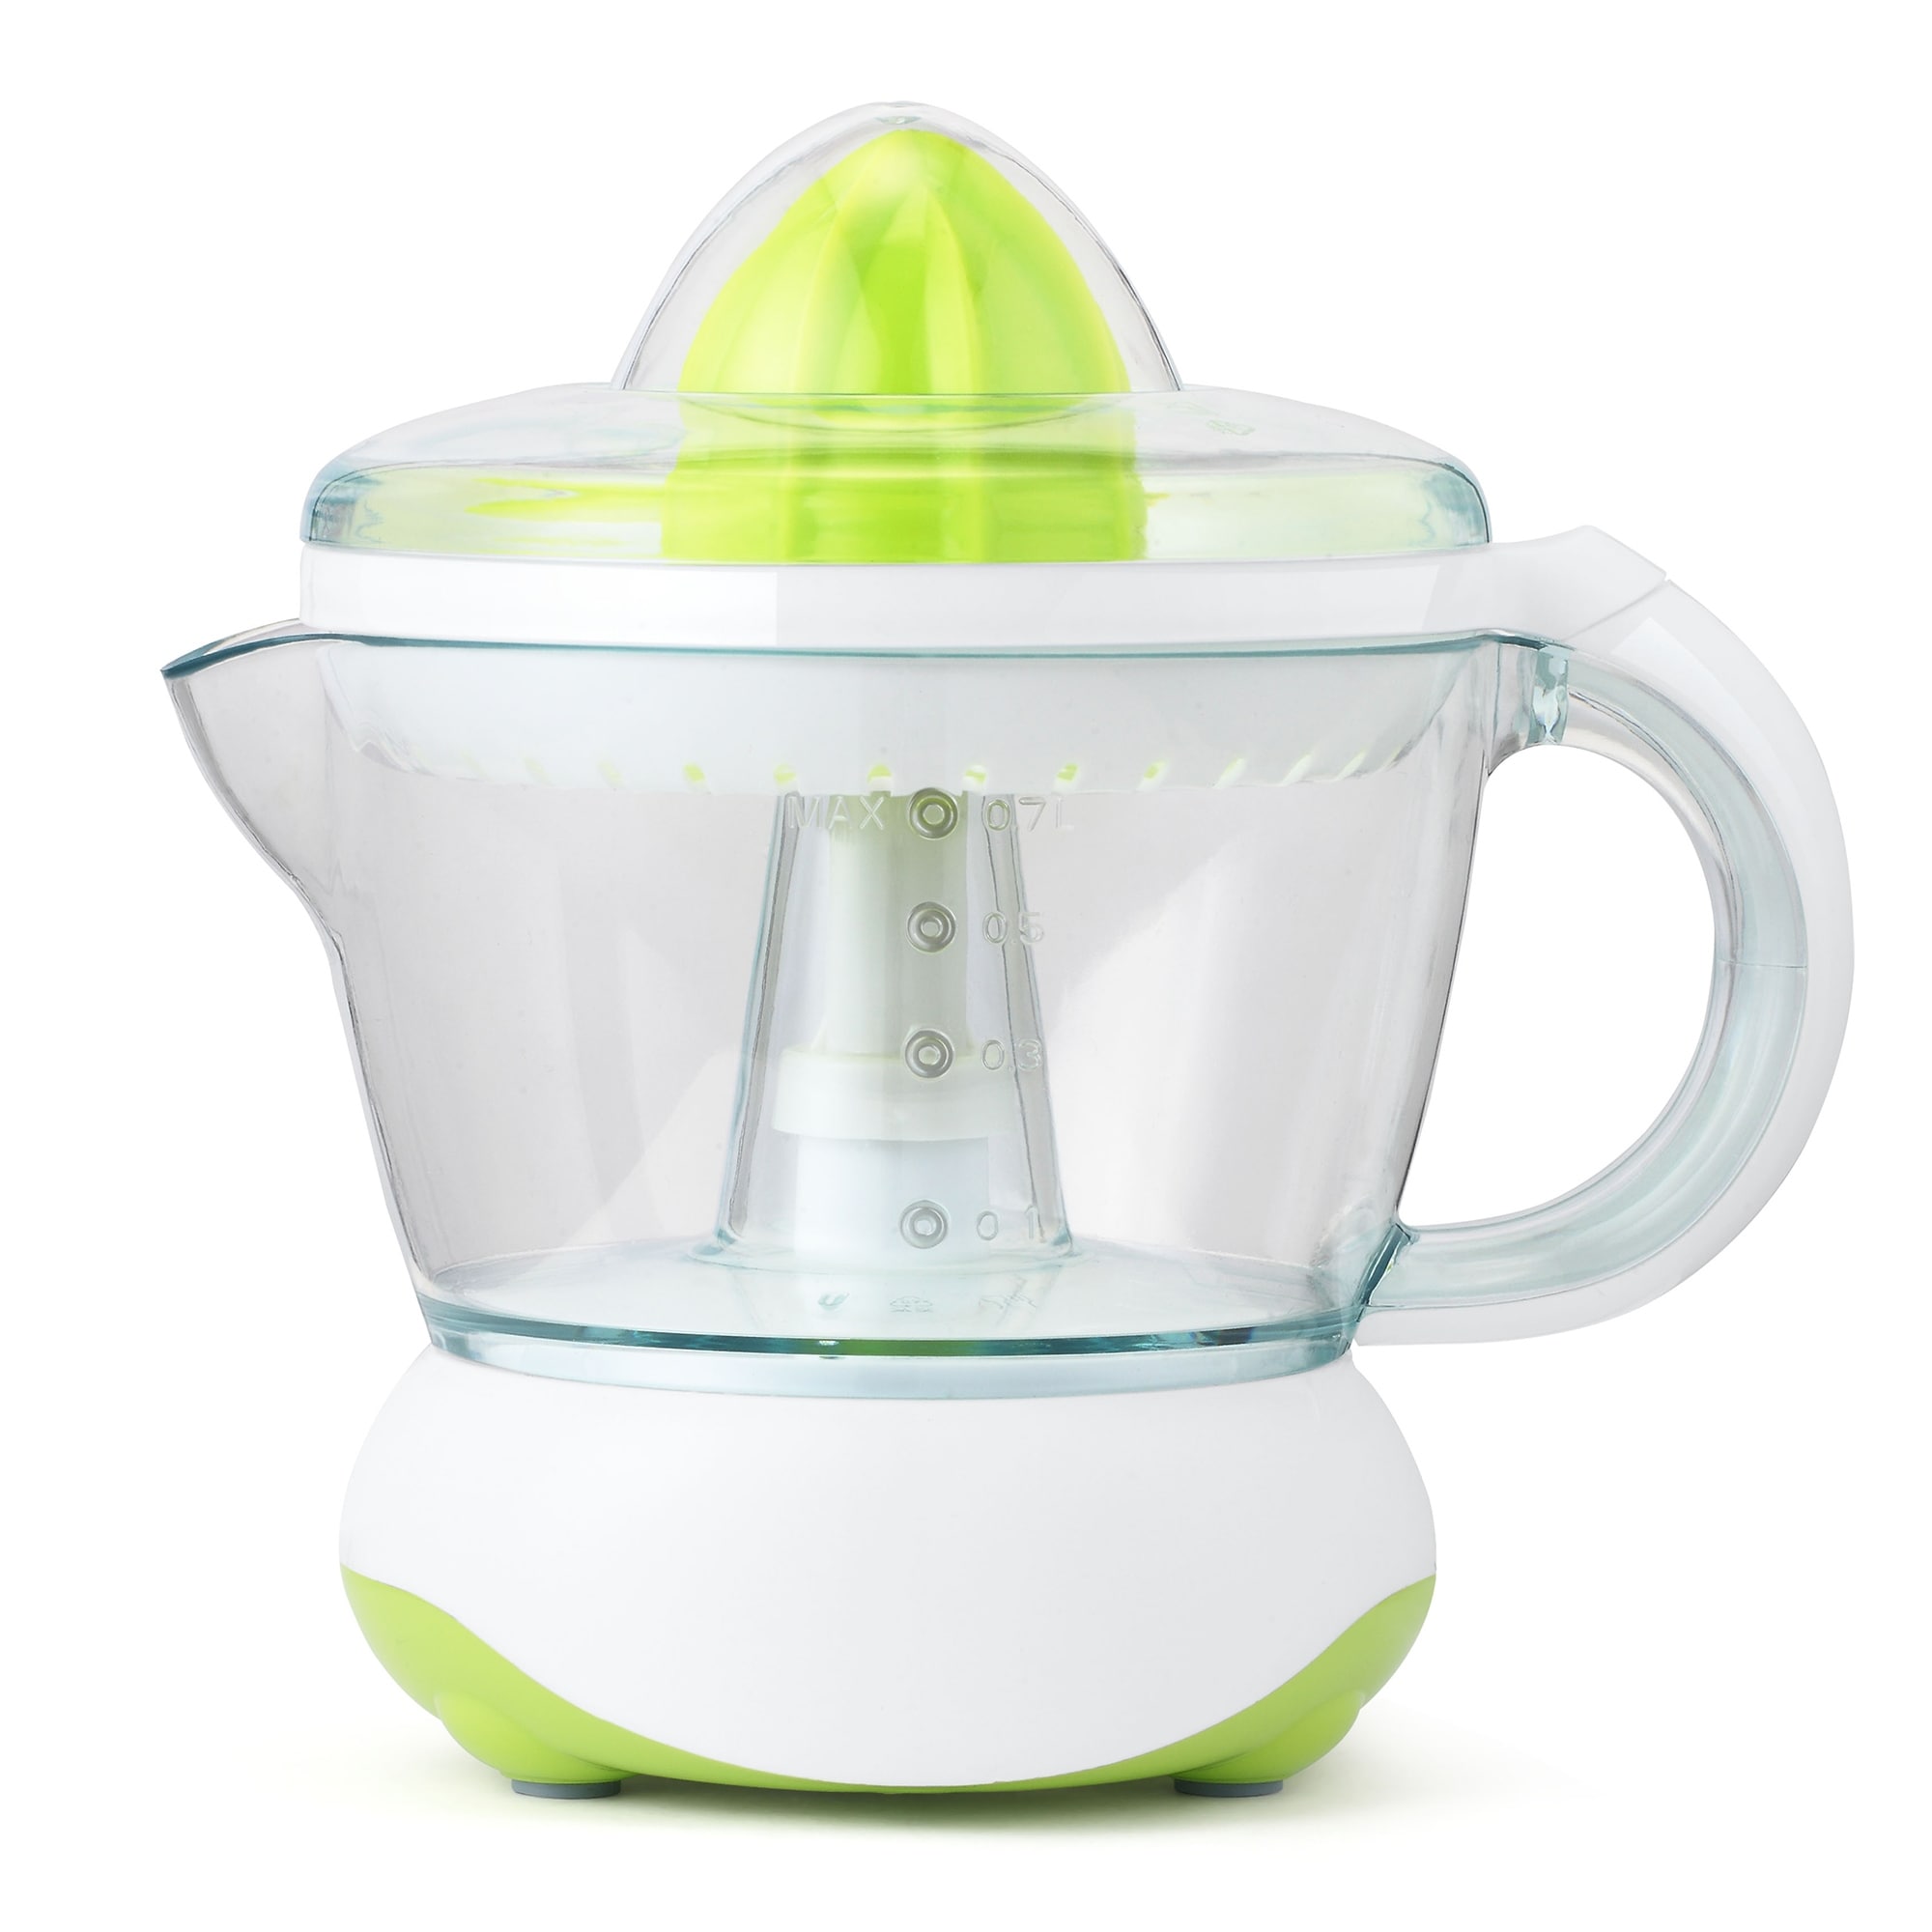 https://ak1.ostkcdn.com/images/products/is/images/direct/d05148ca165bcce05f51c3cd42deff01d65017d7/Continental-Electric-24-Ounce-Citrus-Juicer.jpg